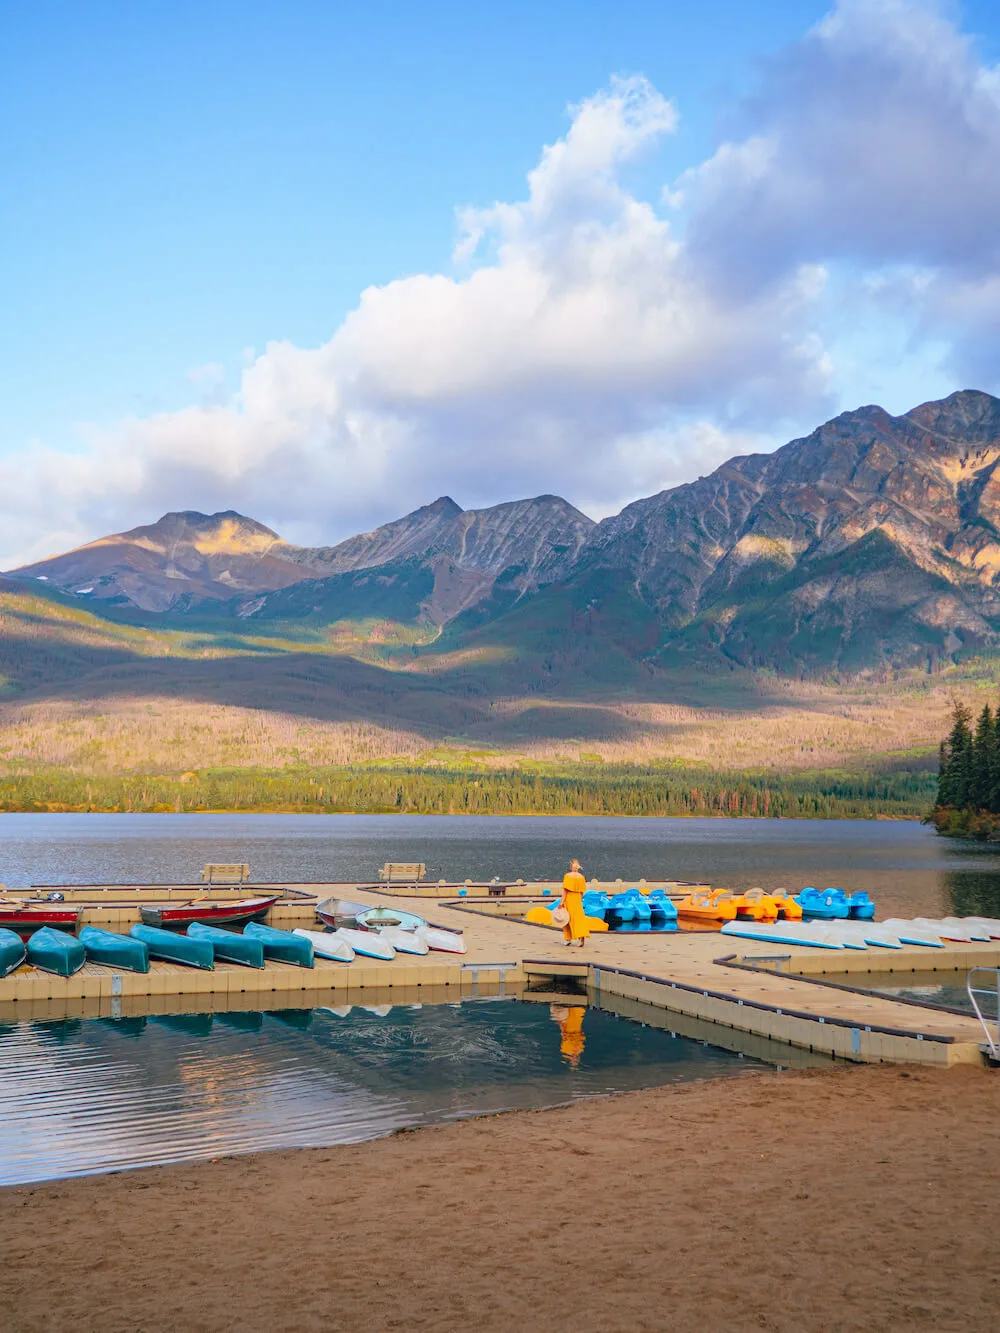 Planning a trip to Jasper National Park soon? Here's a local's guide to some of the best things to do in Jasper. From hikes and trails to adventure sports, family friendly excursions, dining experiences and more. You won't want to miss this guide of the best things to do and places to see in Jasper. Pictured here: Pyramid Lake Resort